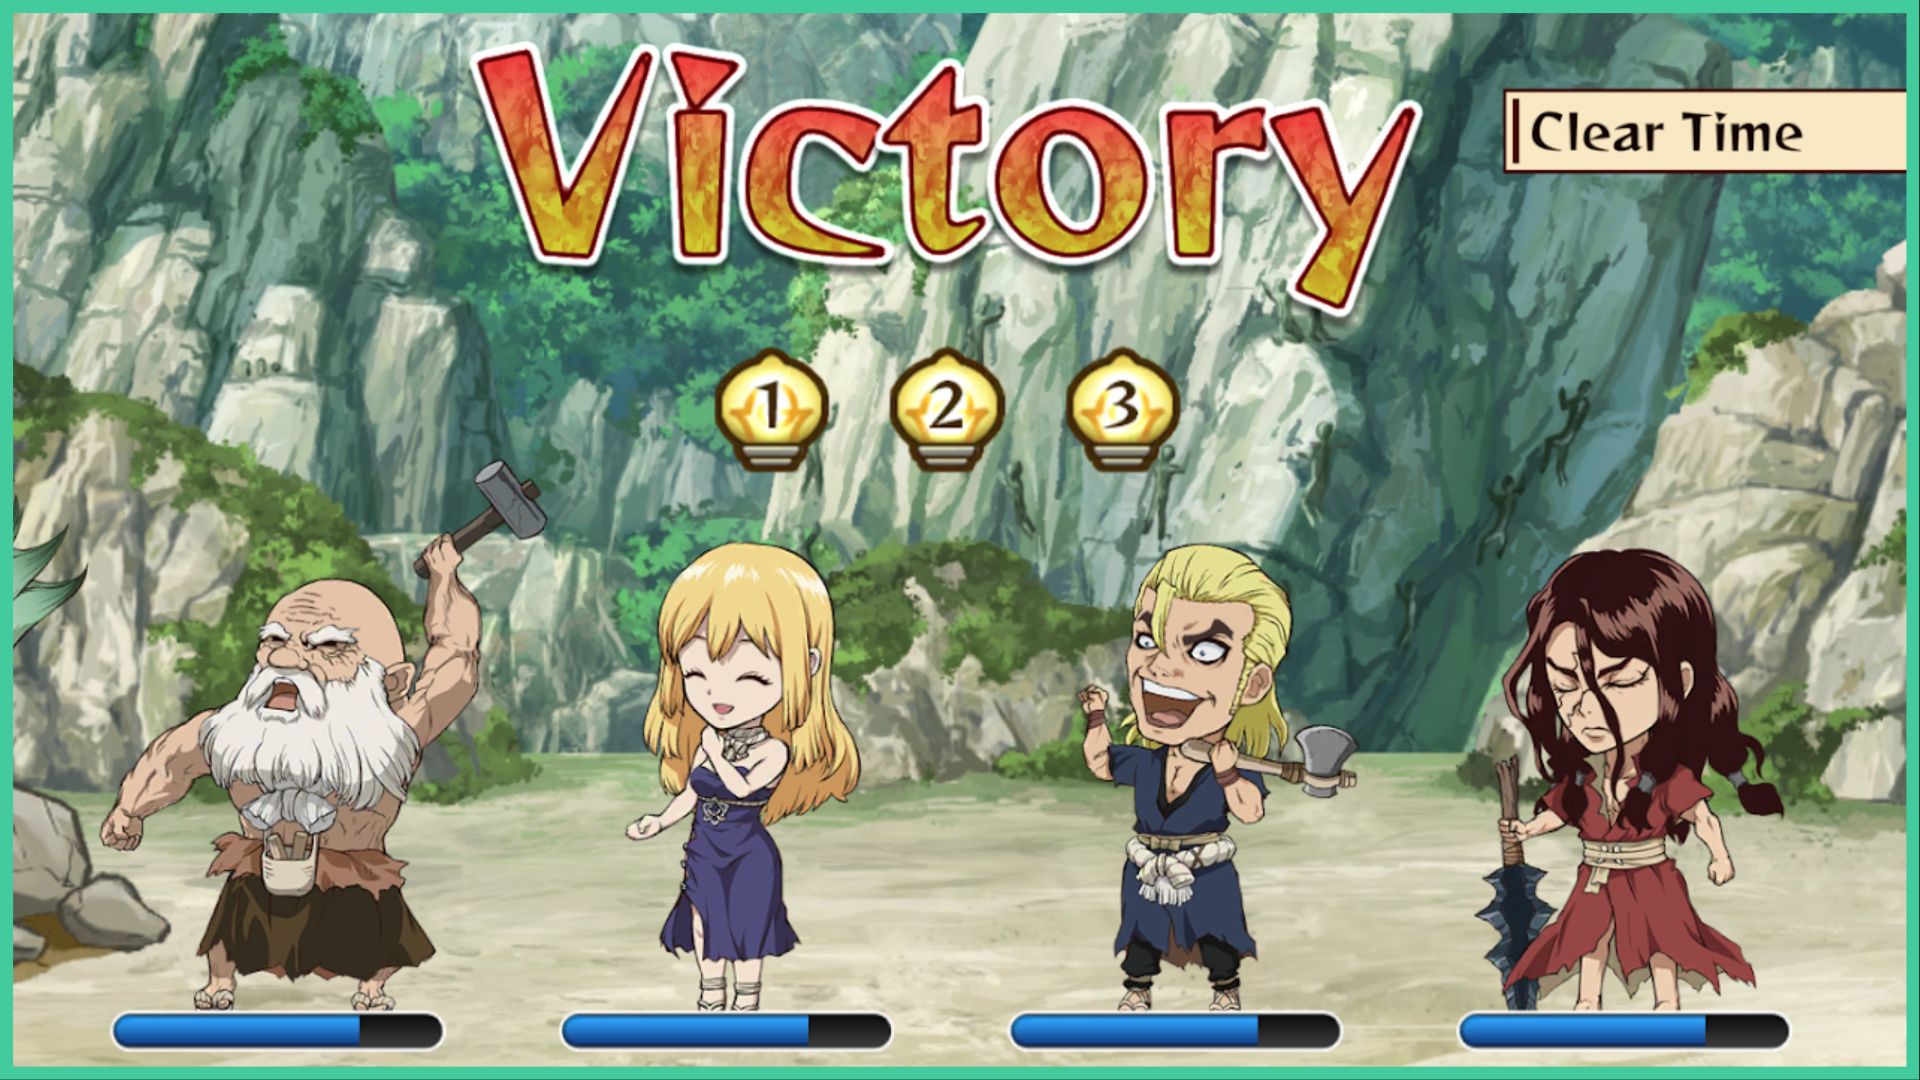 feature image for our dr stone. battle craft codes guide, the image features a screenshot from a battle in the game, there are 4 characters from the series in chibi form smiling and cheering as they win the battle, with the word "victory" at the top